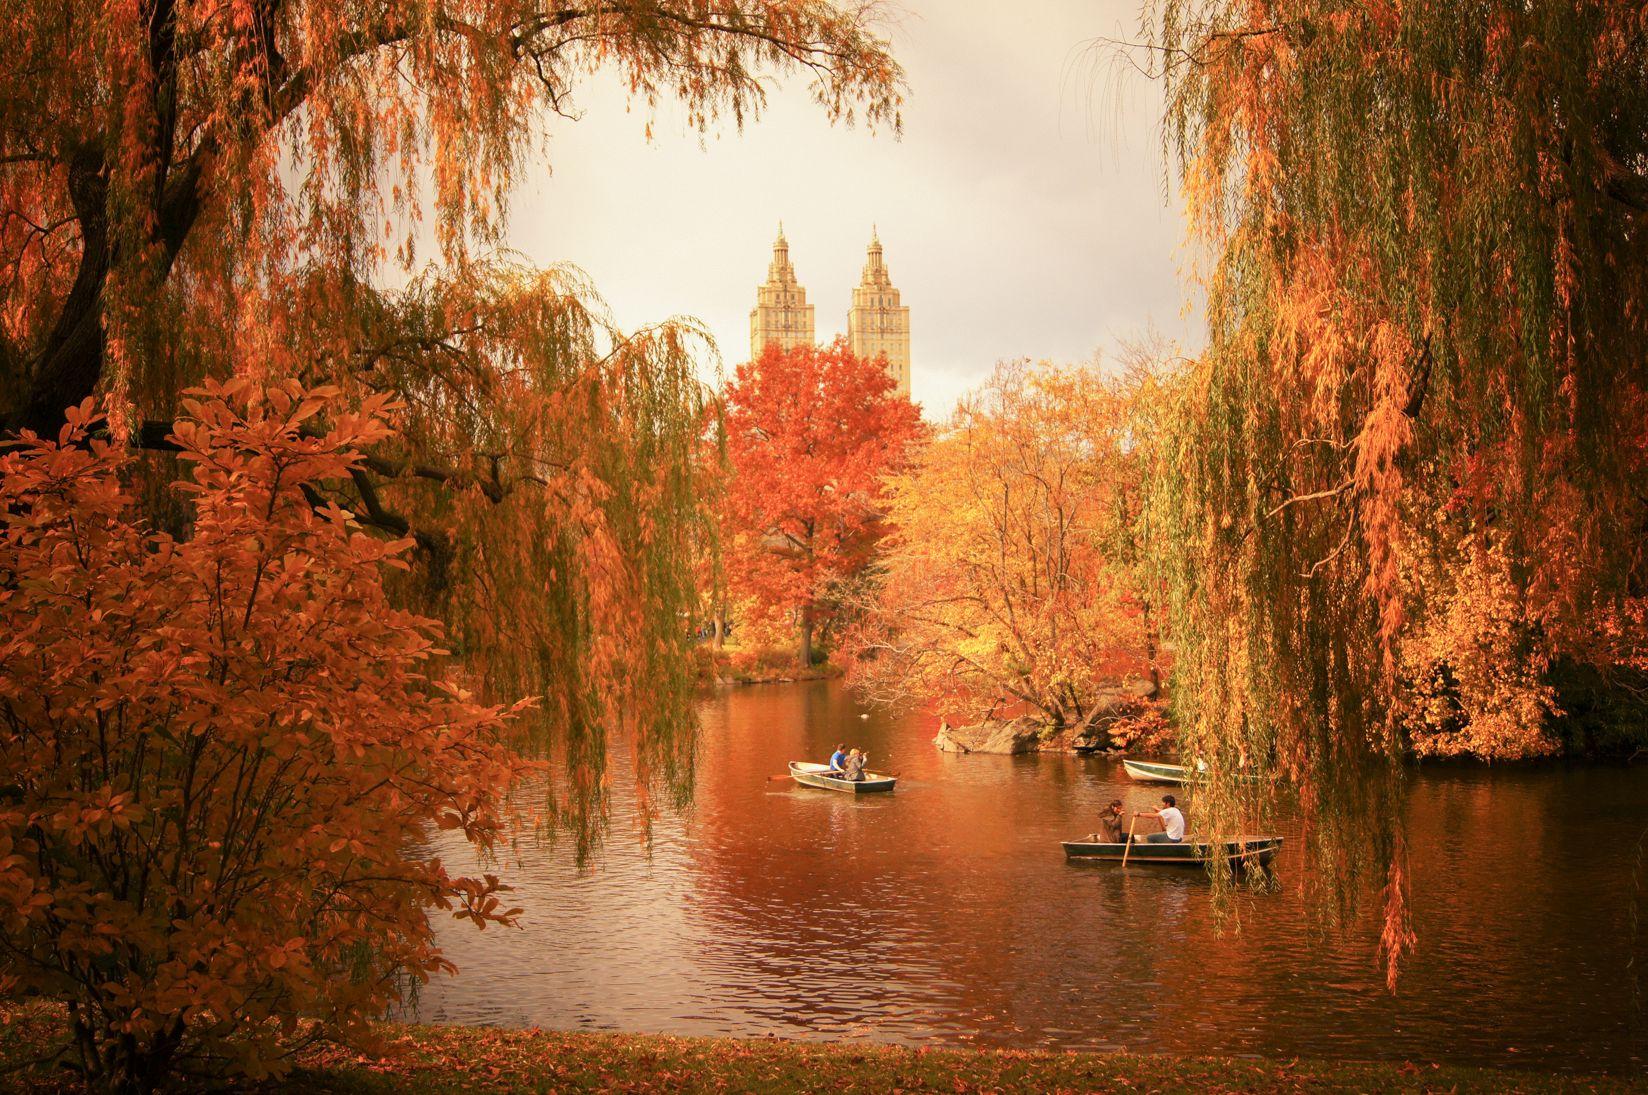 Autumn in New York City in 24 Image